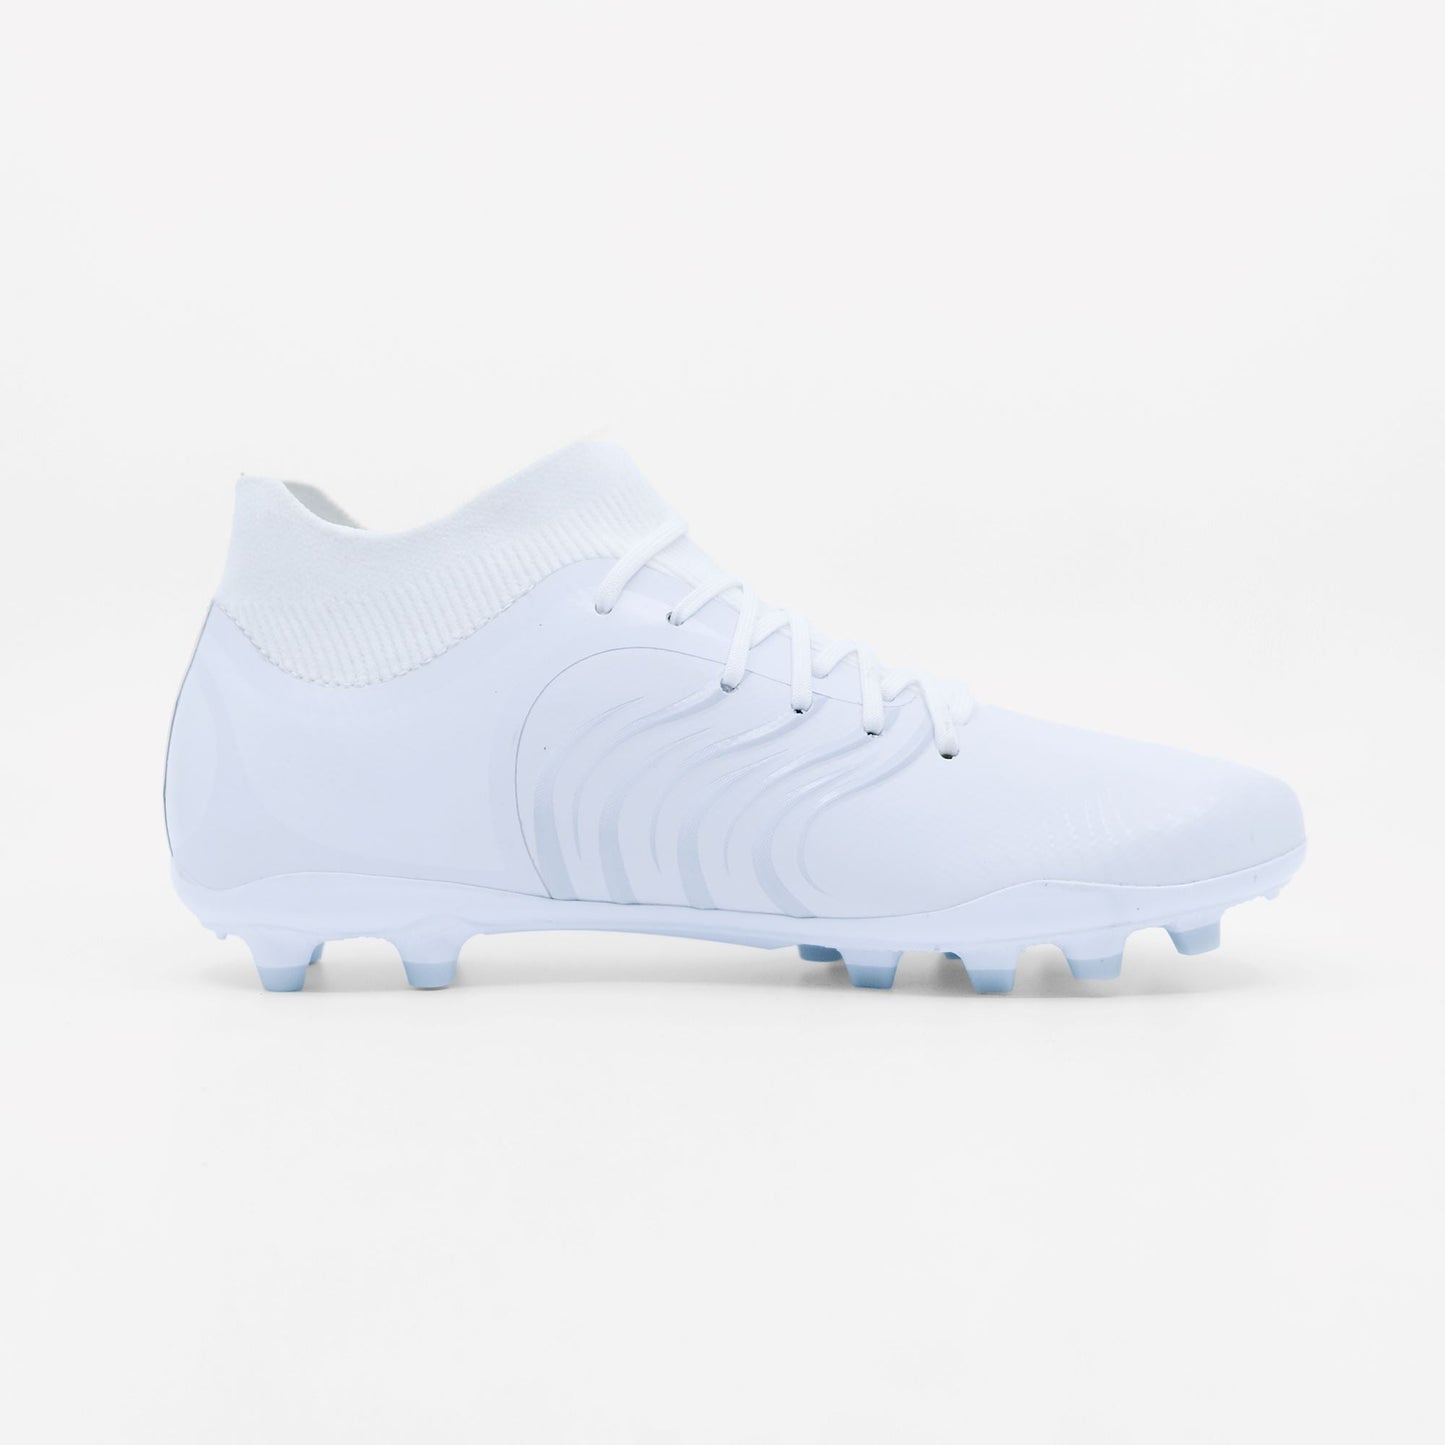 IDA Rise Women's Soccer Cleat, White, FG/AG, Firm Ground, Artificial Ground, Ankle sock, inside of the left cleat showing white silver waves on the white cleat